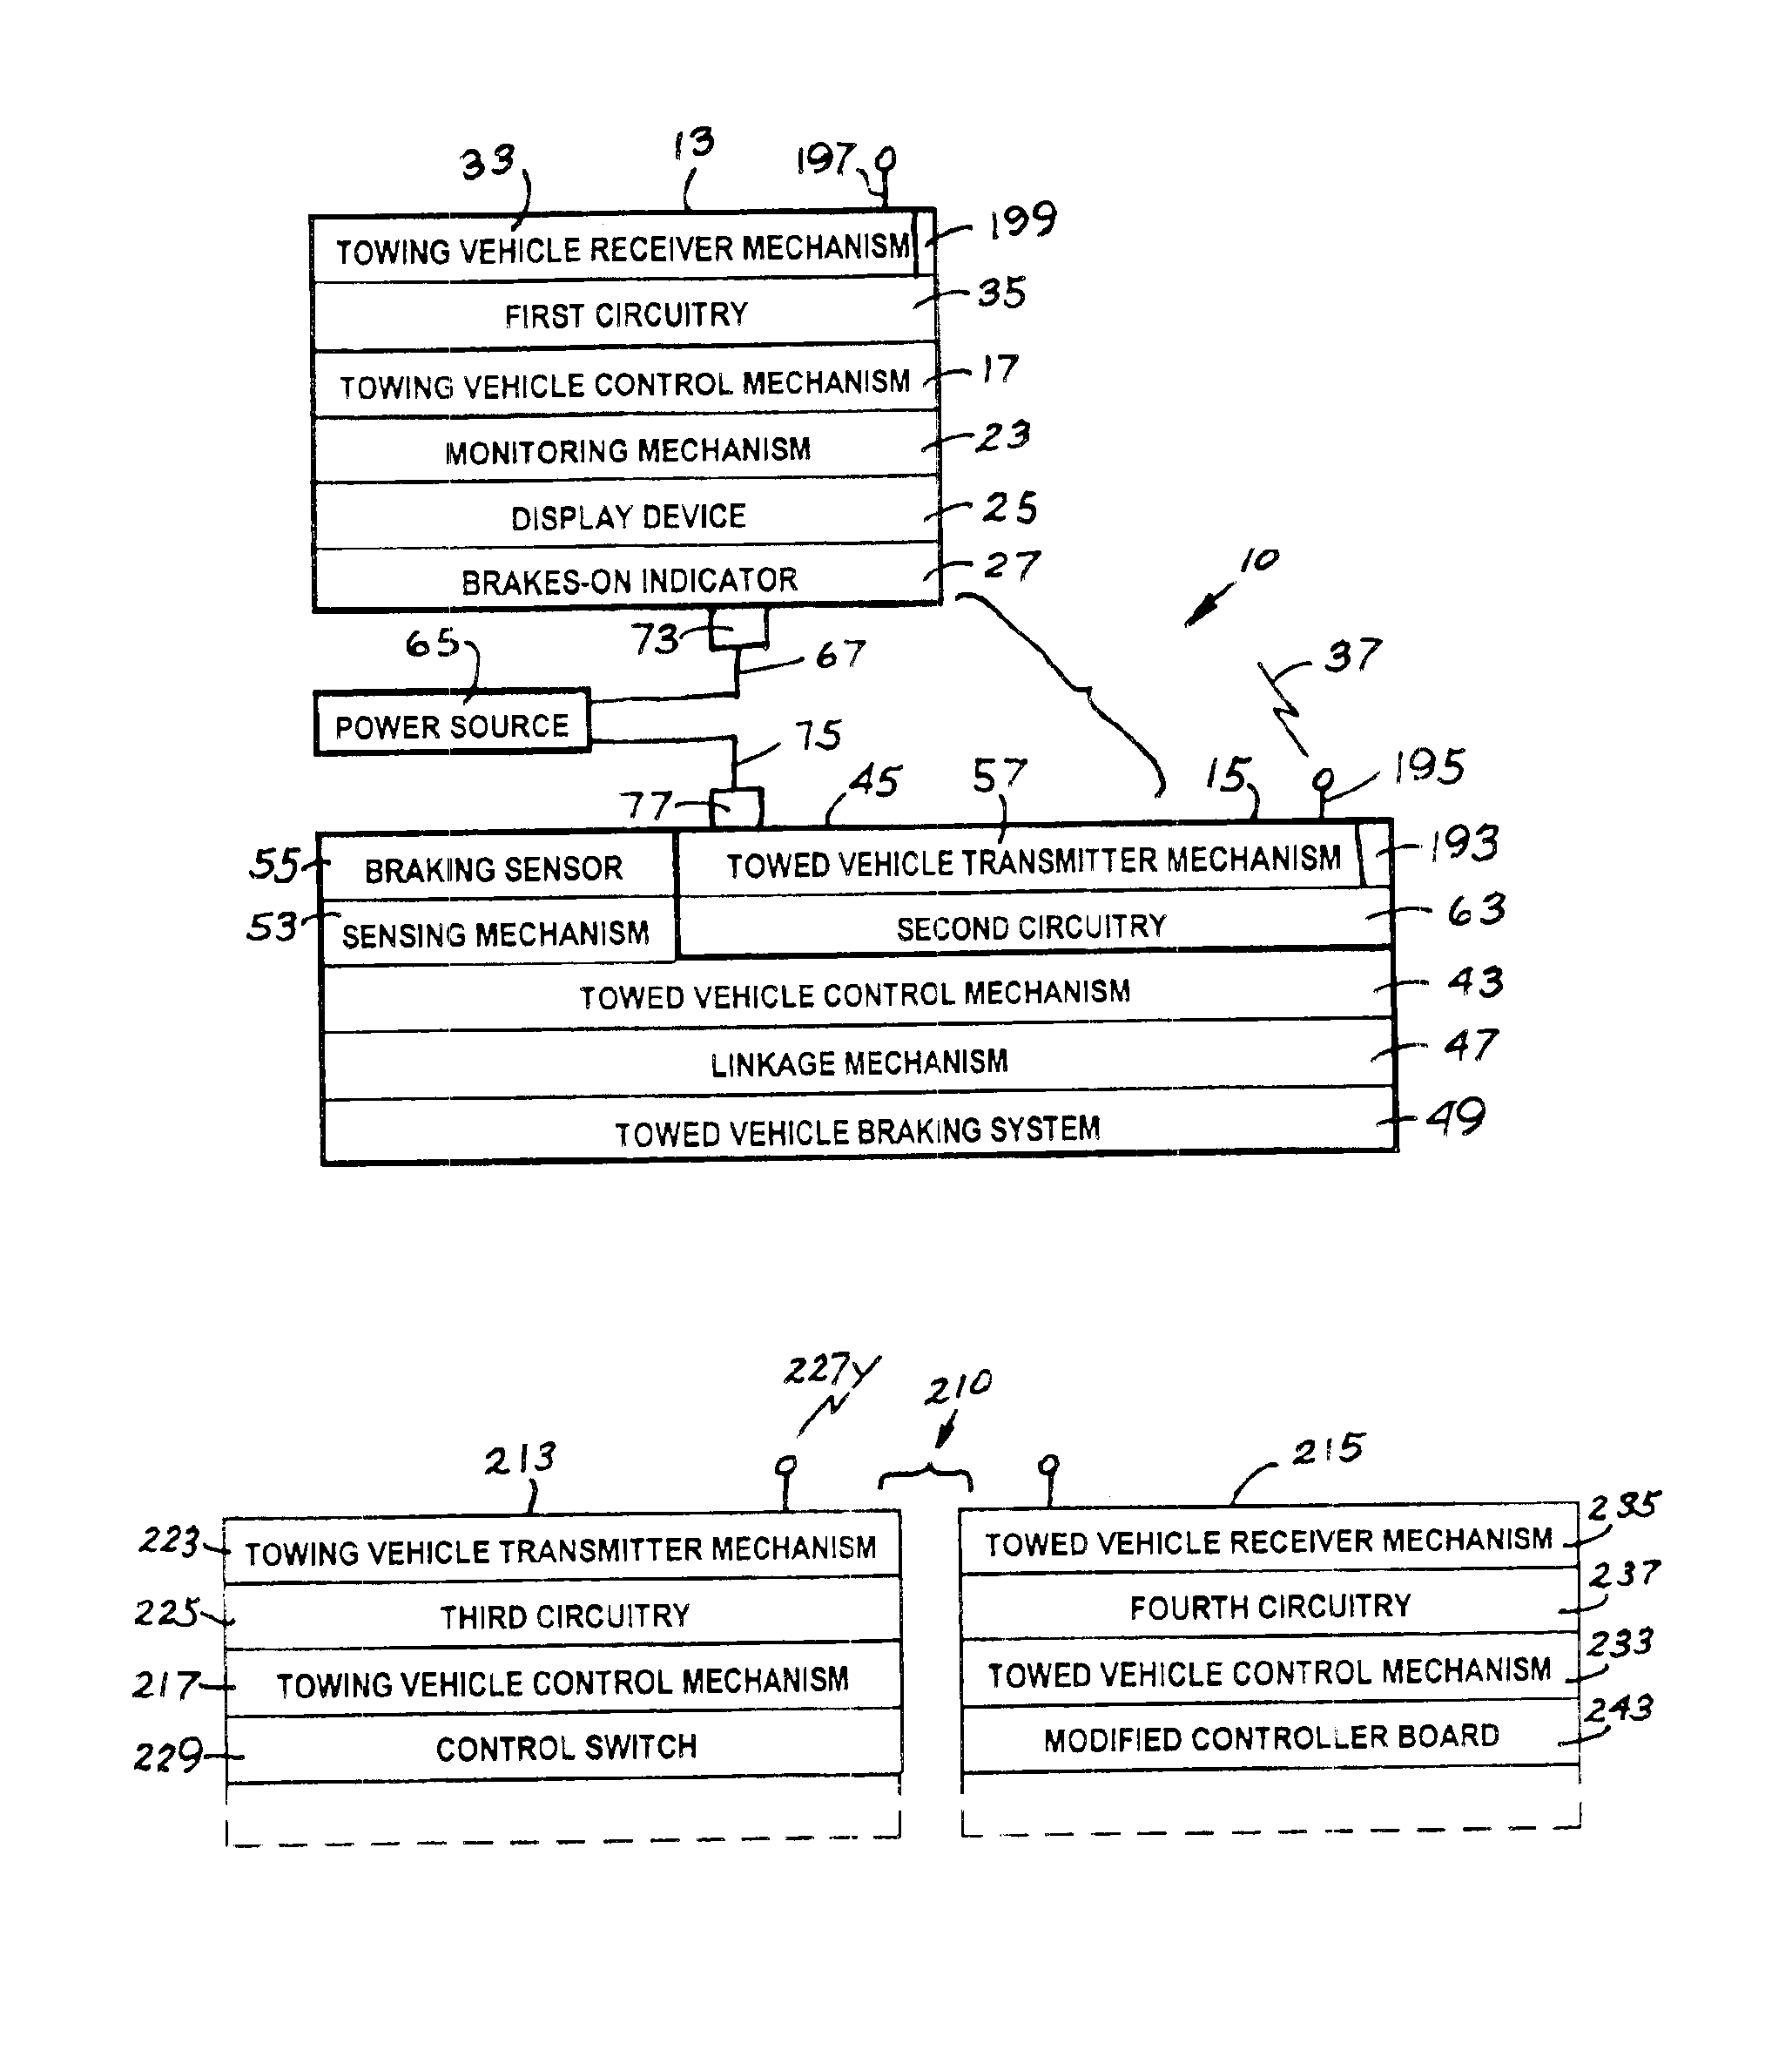 Braking control system for a vehicle being towed by another vehicle